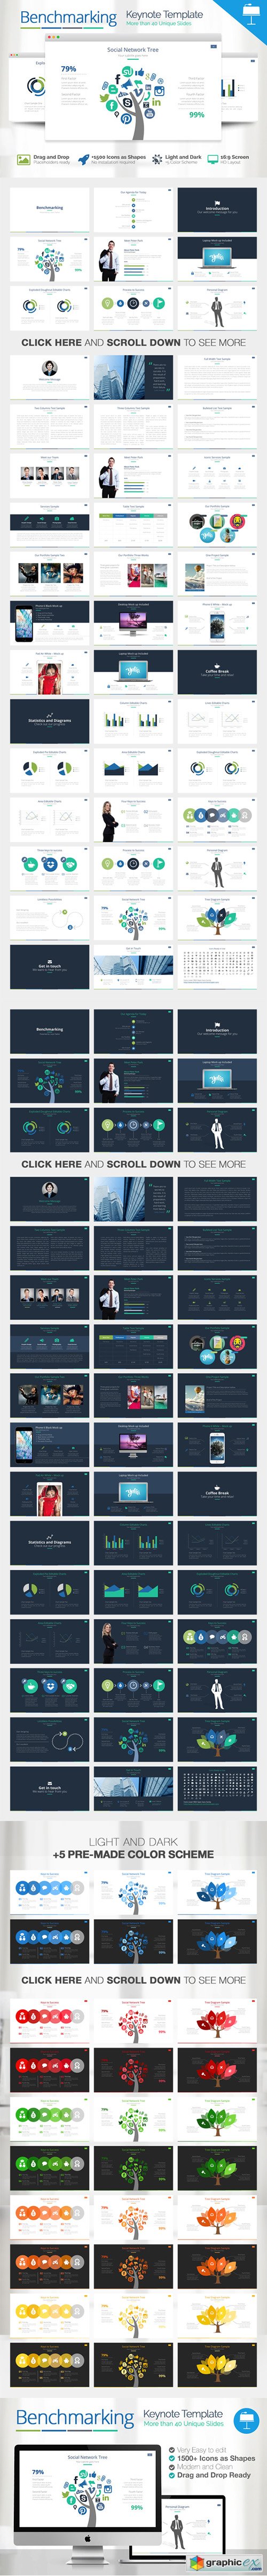  Benchmarking Business Keynote Template